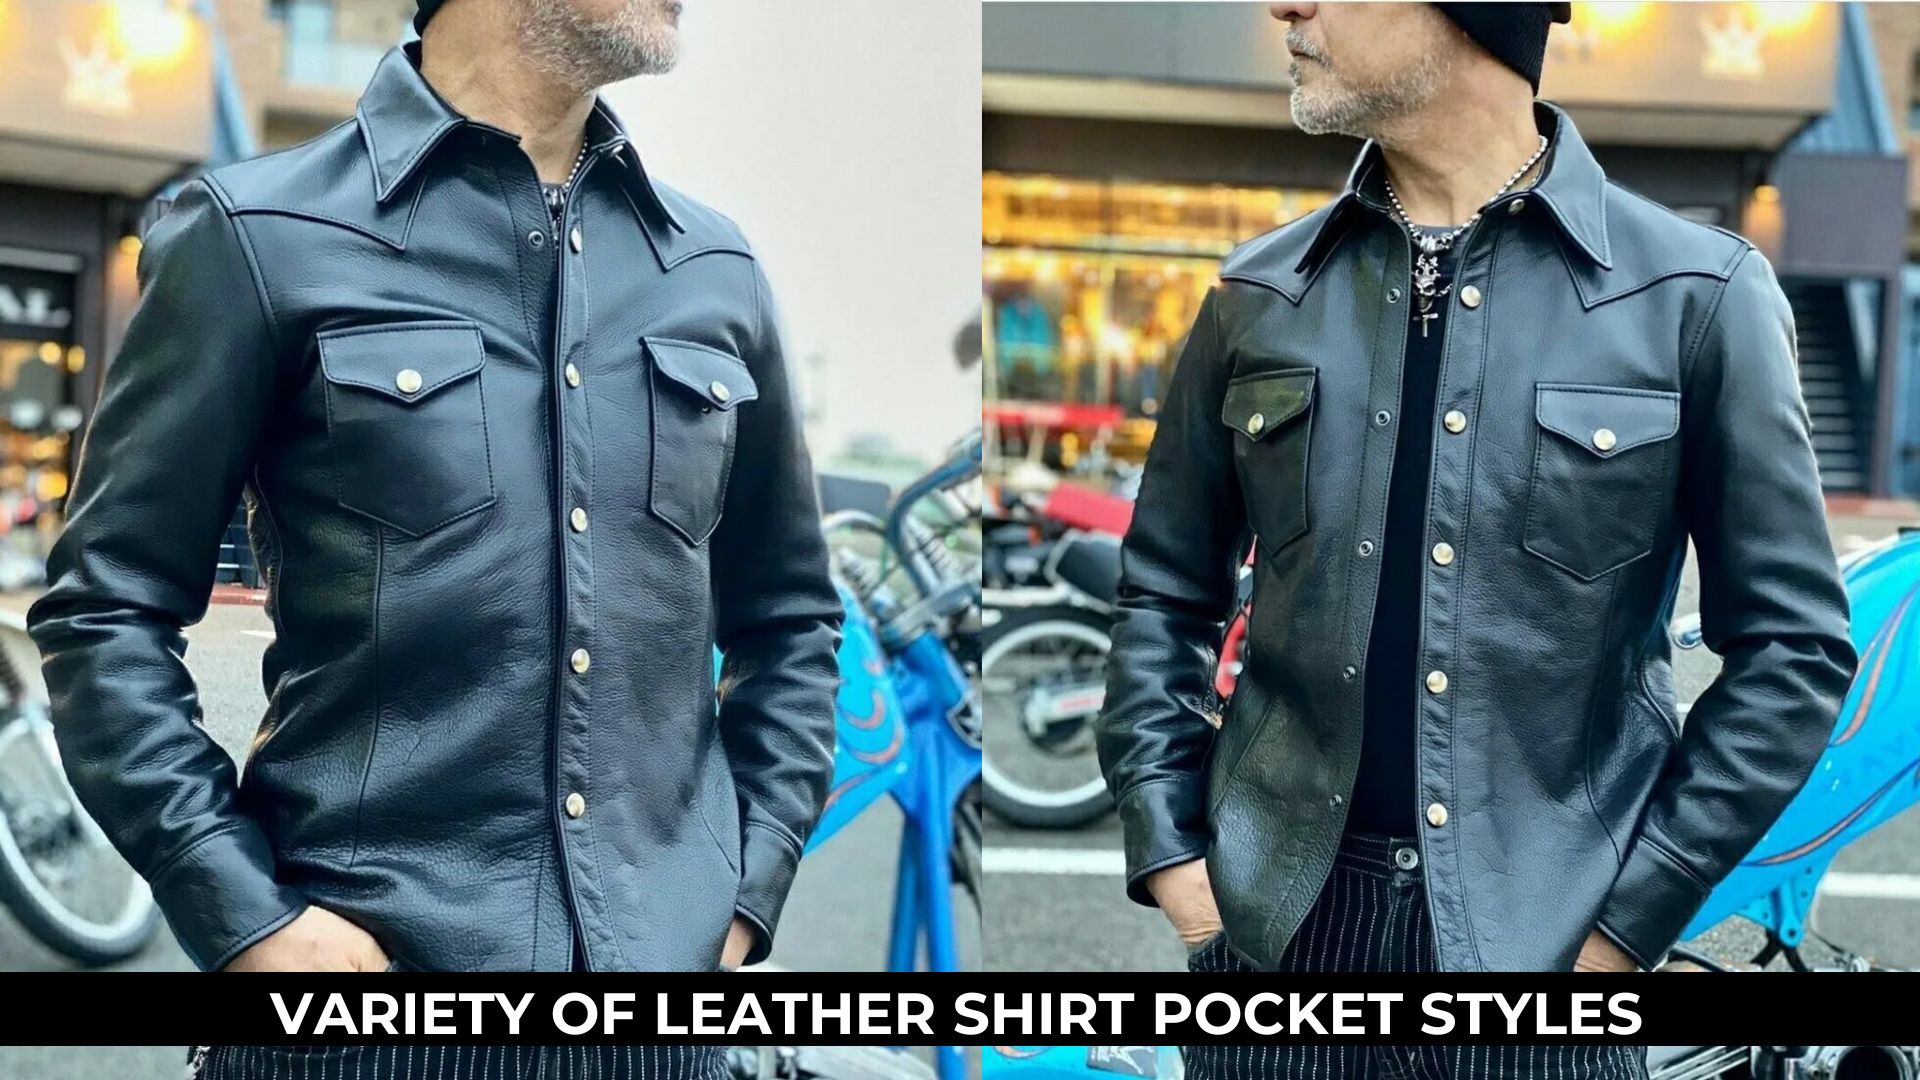 Pocket Perfection Navigating the Variety of Leather Shirt Pocket Styles